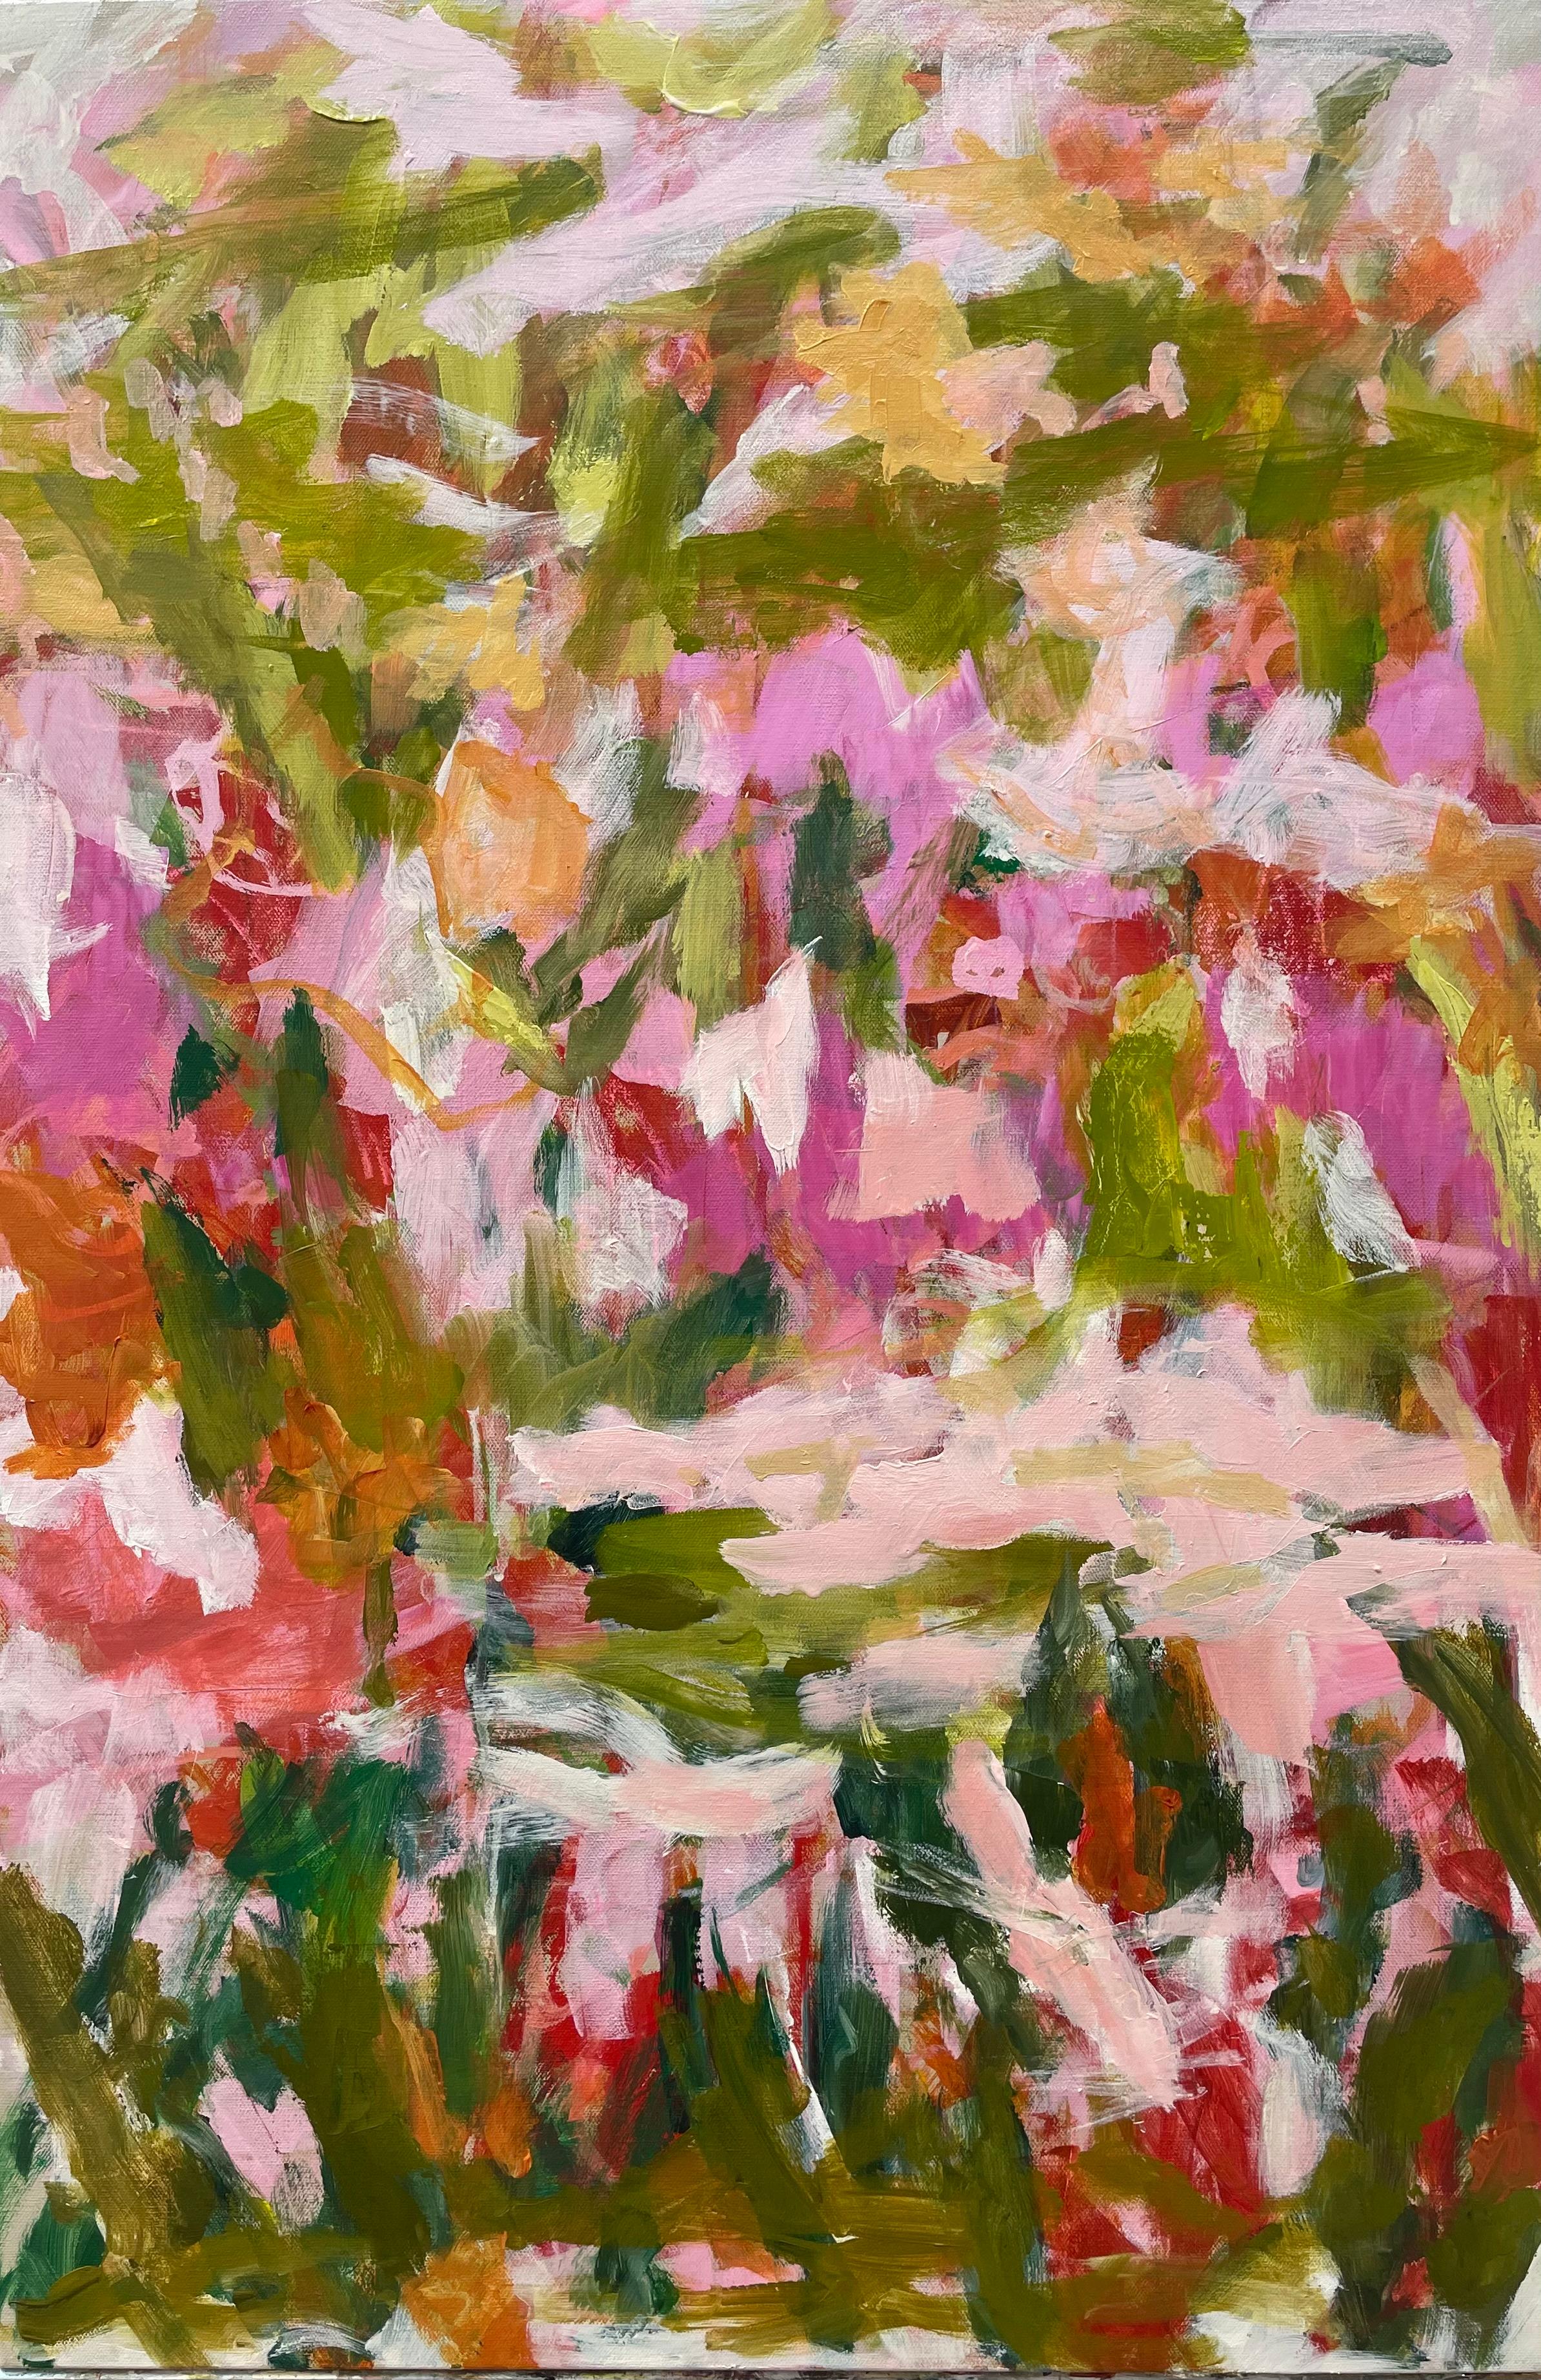 Among the Blossoms  is an contemporary abstract  painting by Texan artist Eleanor McCarthy.  It can also be described as a abstract floral painting. Eleanor McCarthy uses acrylic paints on canvas to create the soothing colors in her new contemporary